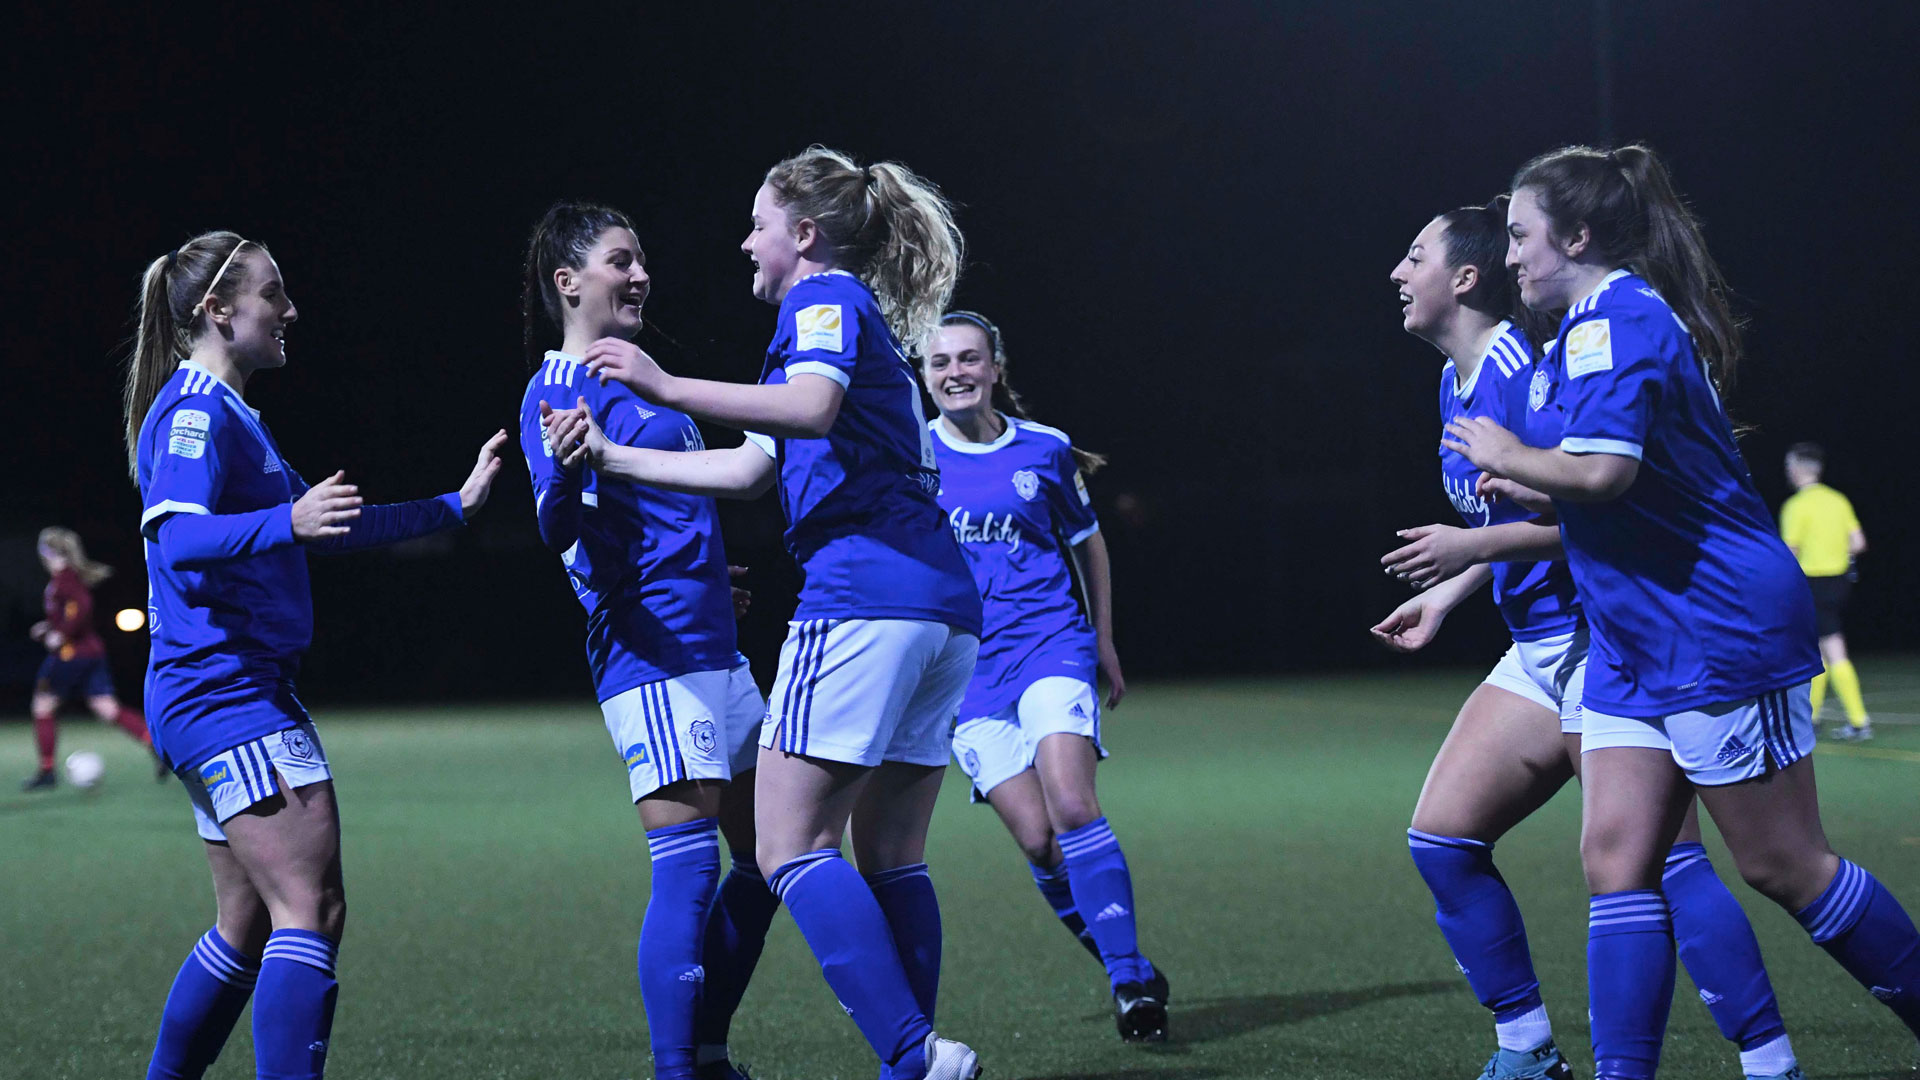 The Bluebirds celebrate Poole's goal in Leckwith...